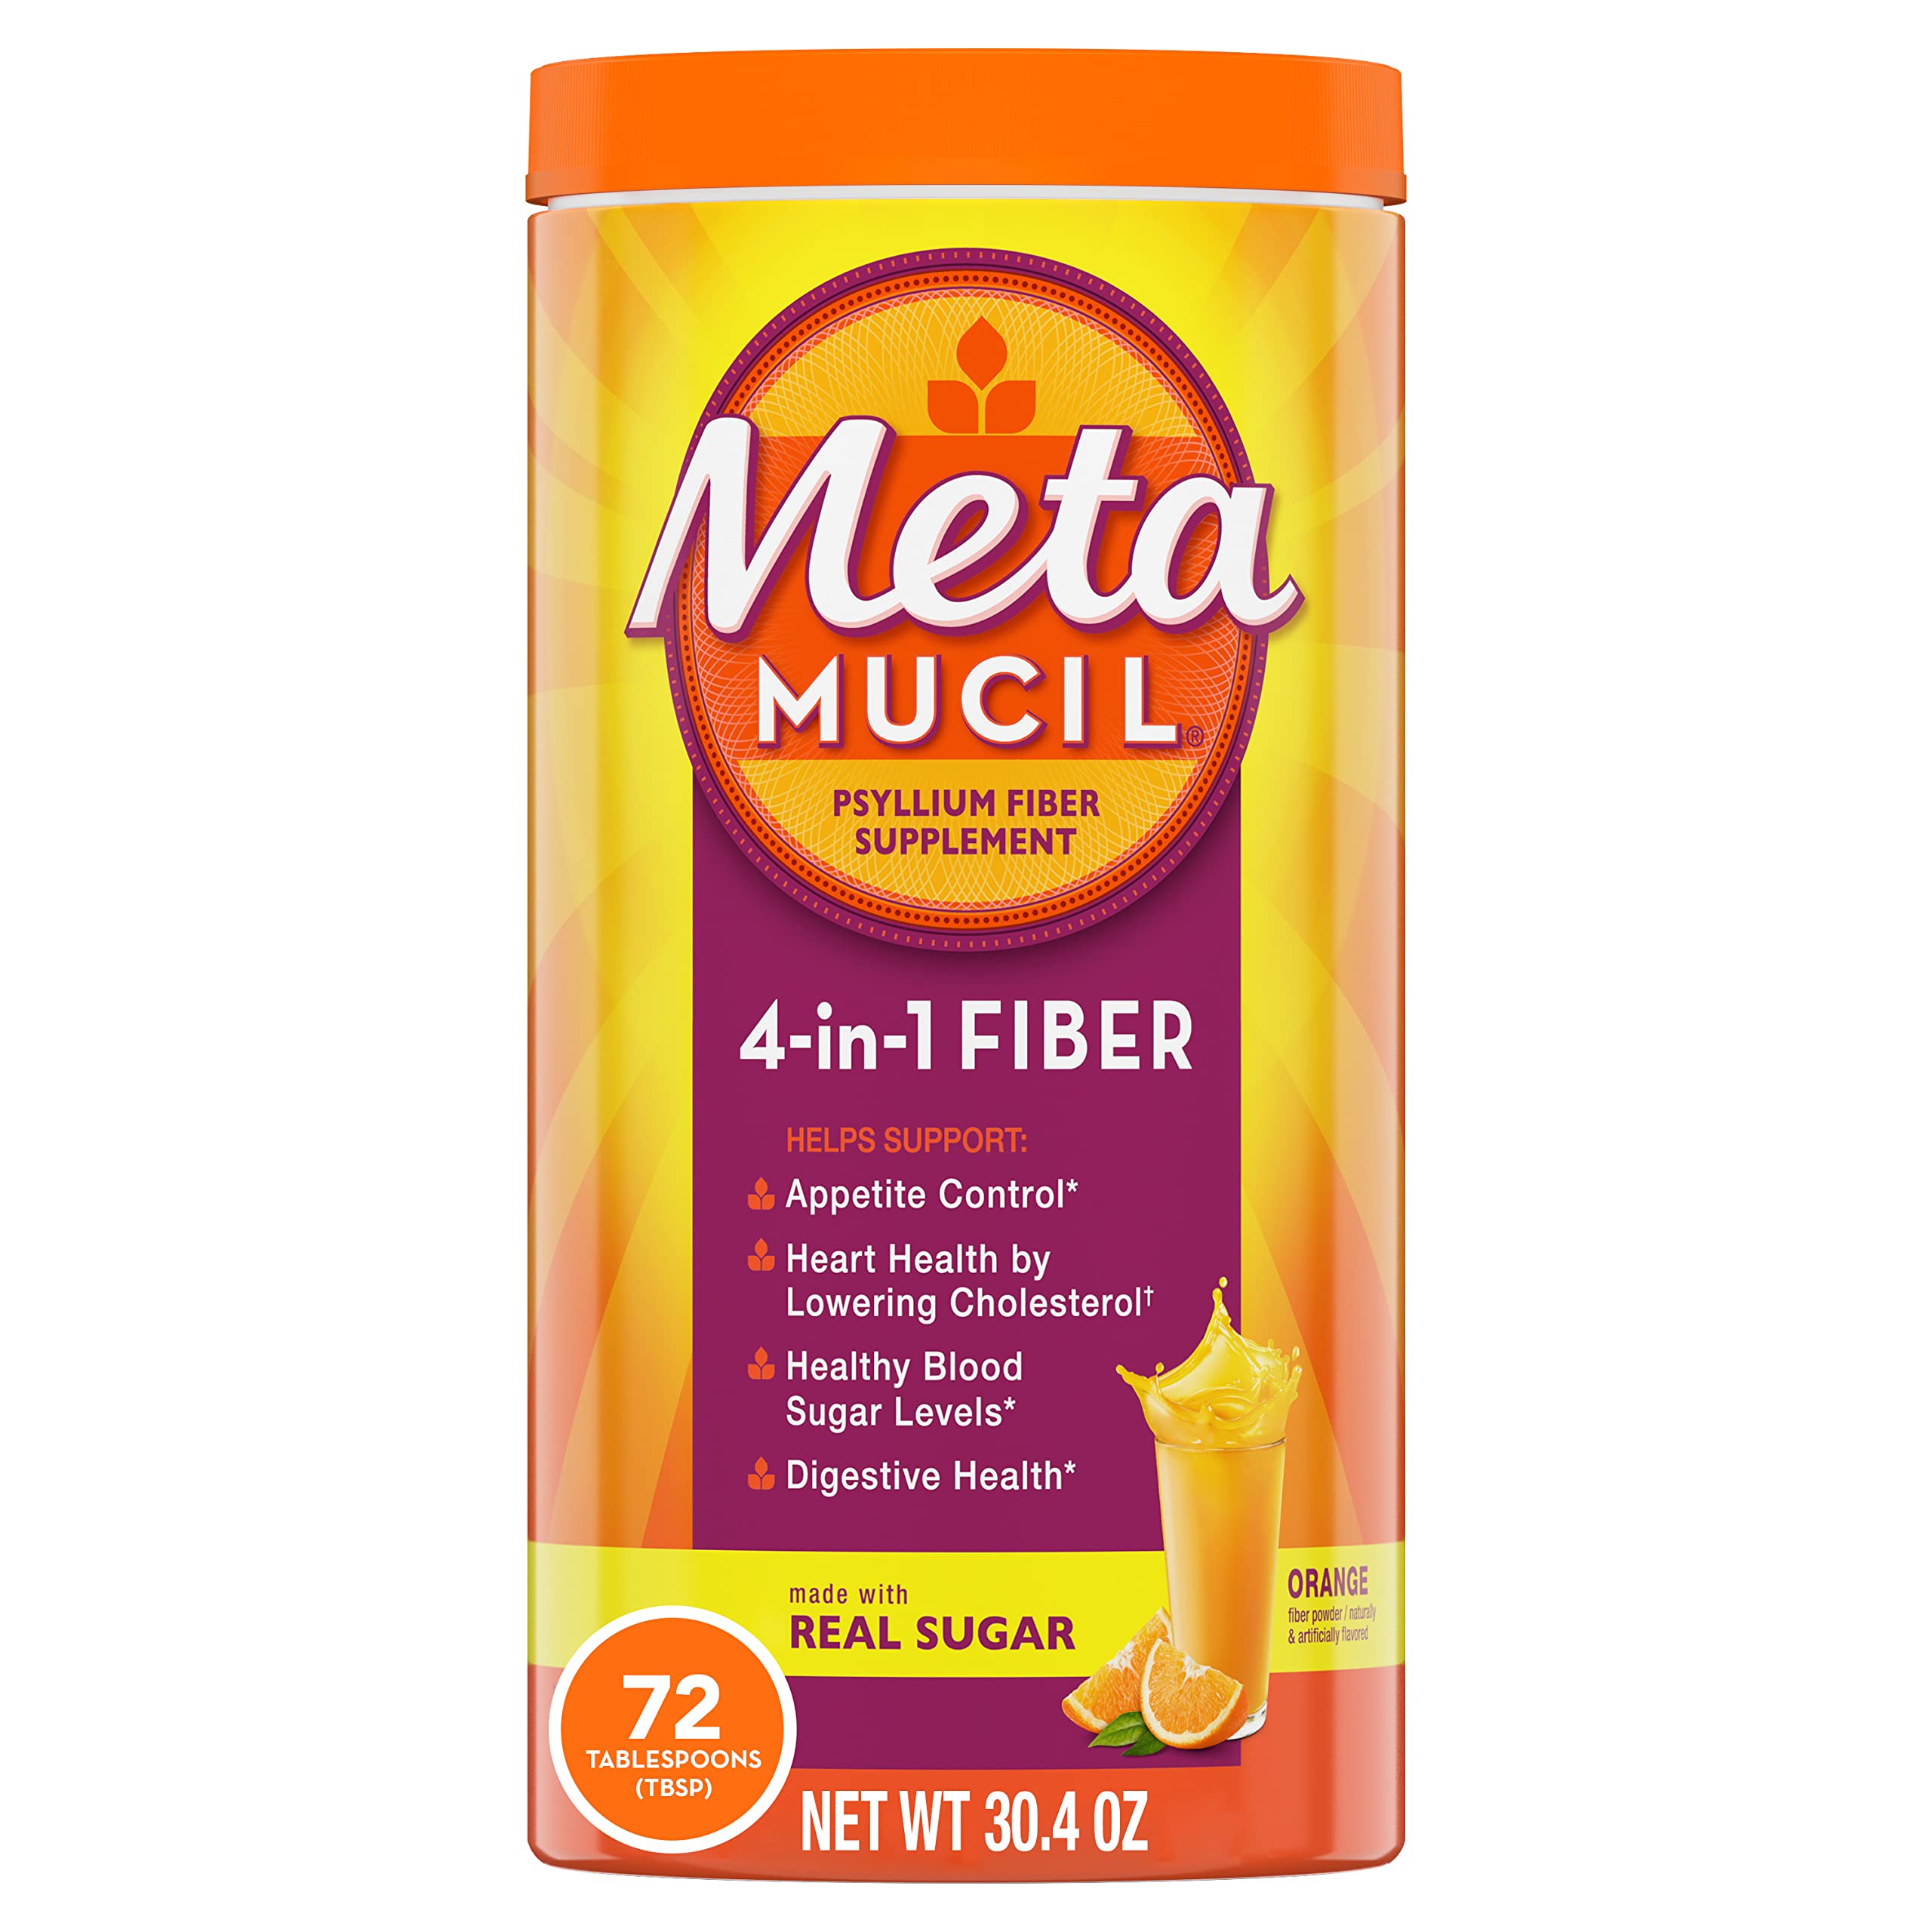 Metamucil Fiber, 4-in-1 Psyllium Fiber Supplement Powder with Real Sugar, Orange Smooth Flavored Drink, 72 Servings (Packaging May Vary), Coarse Texture, 1.9 Pound (Pack of 1)